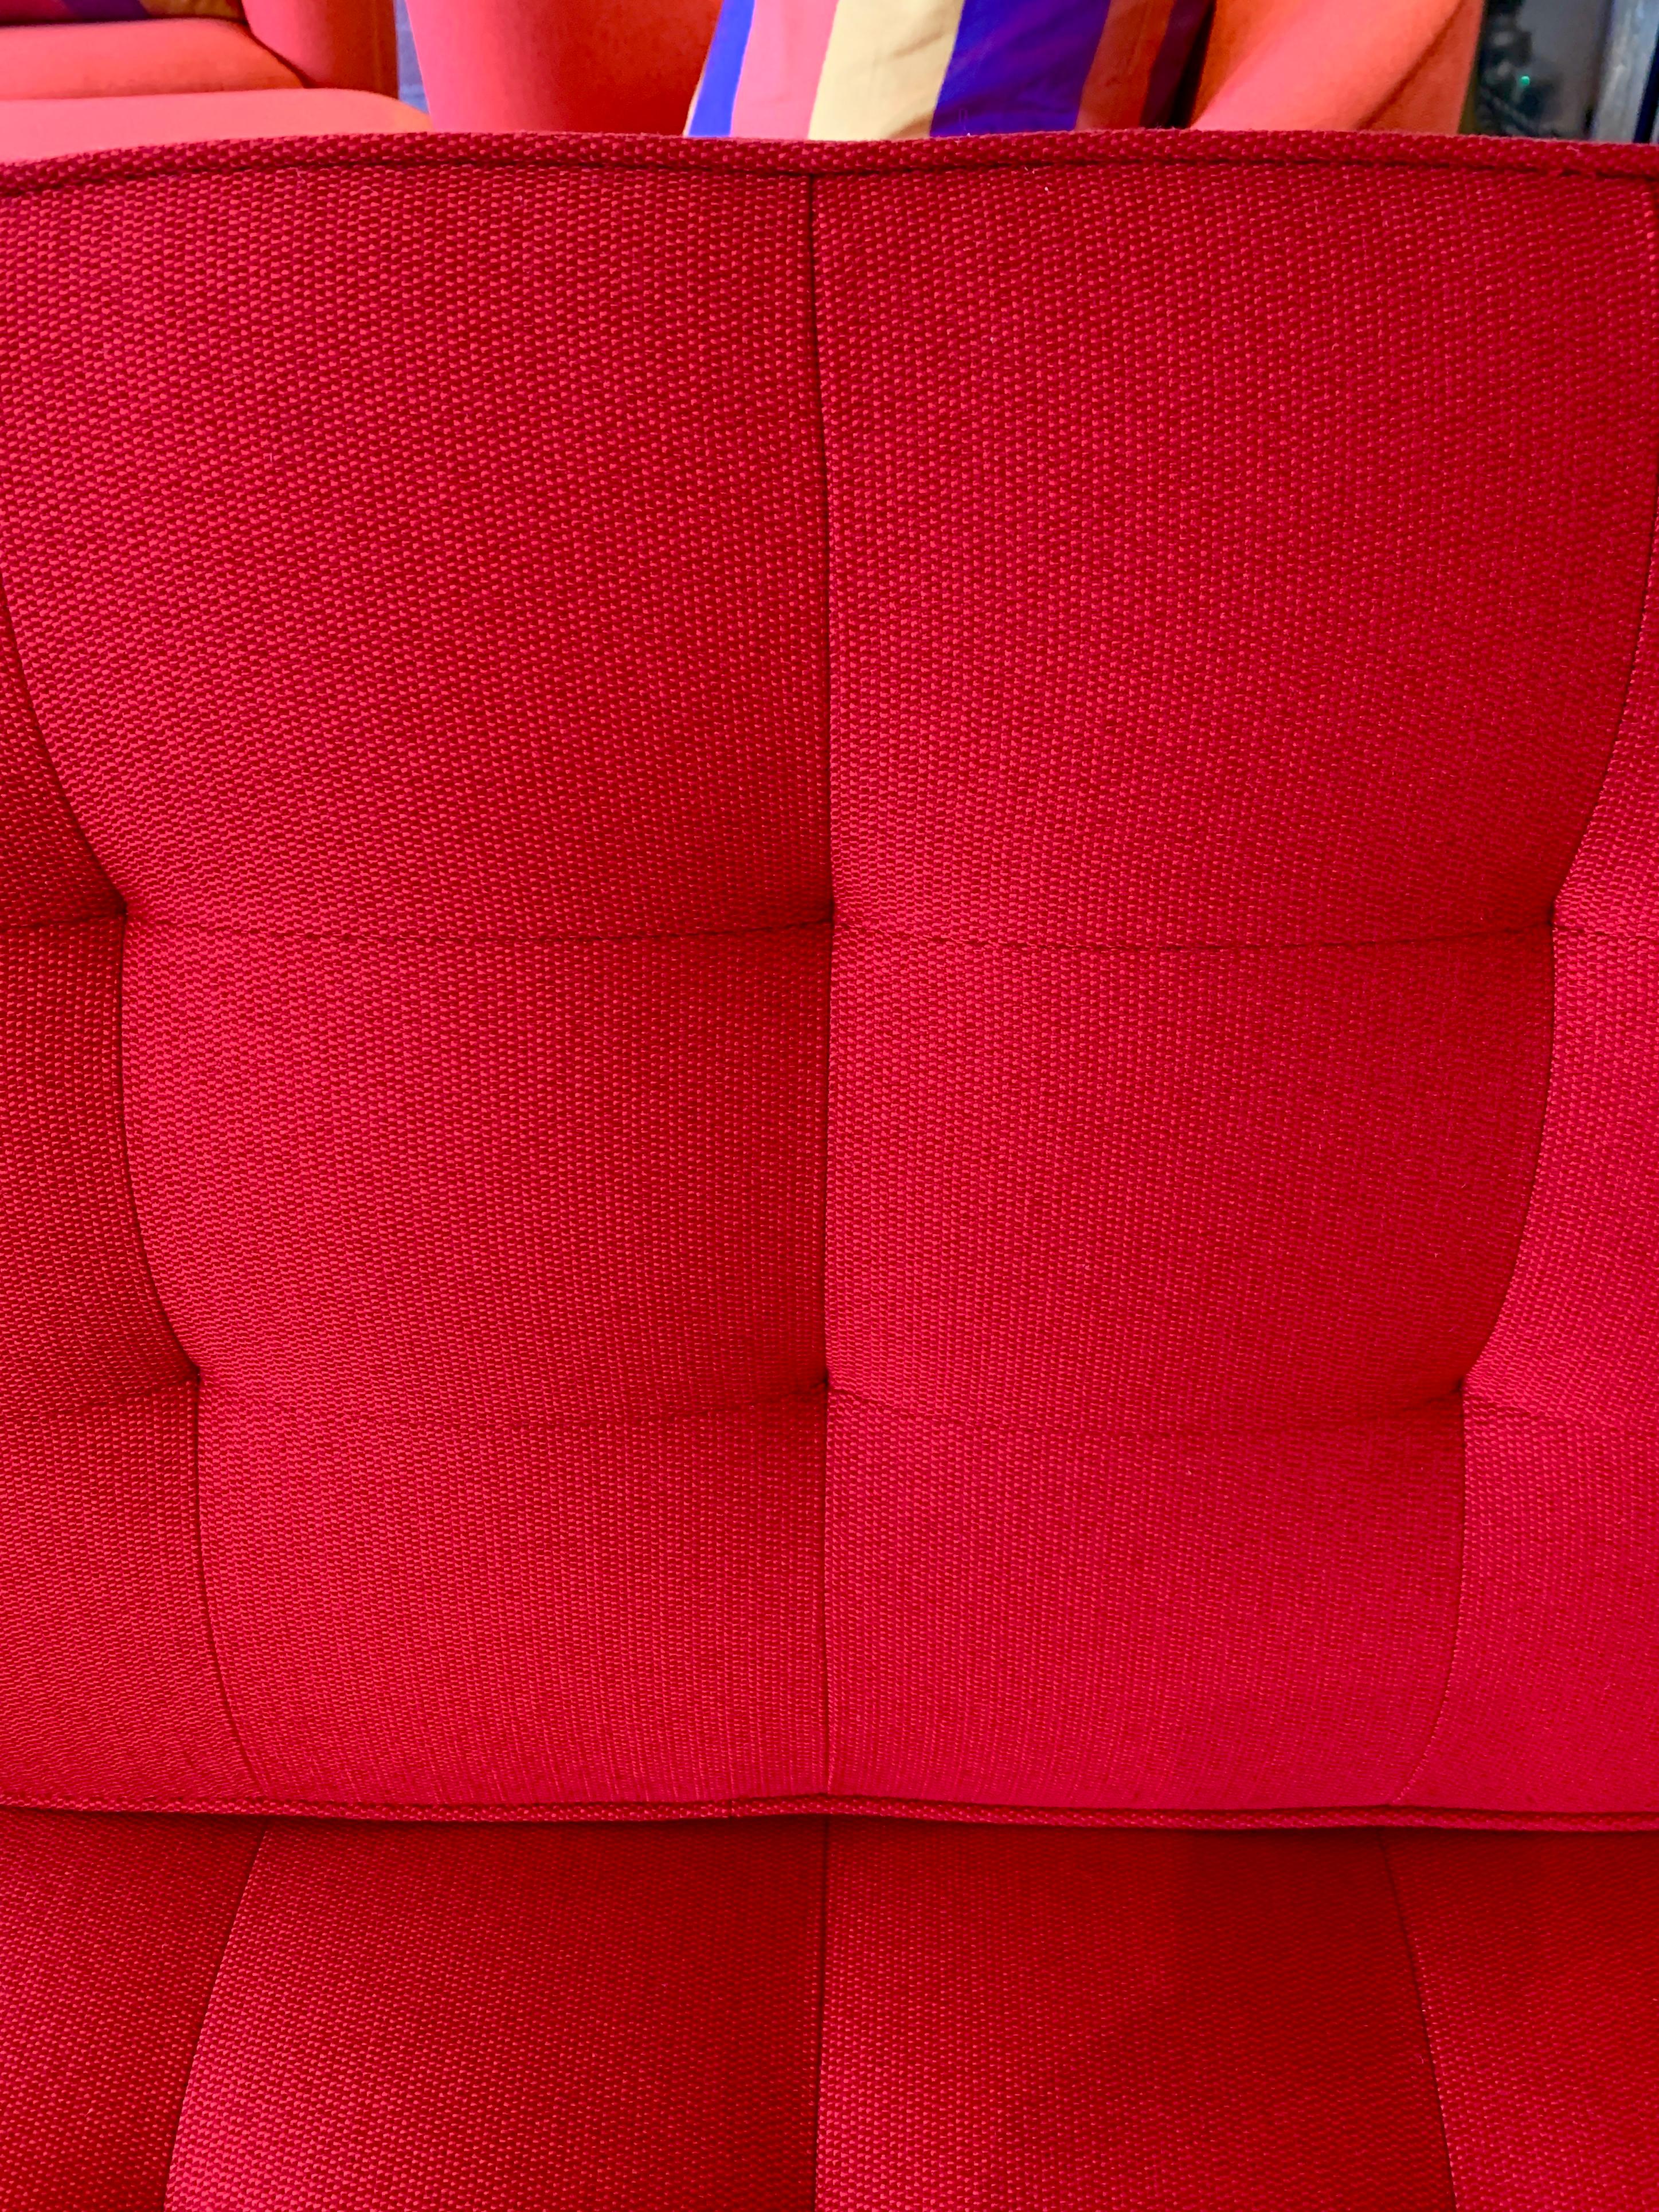 Red Florence Knoll Lounge Chairs For Sale 4